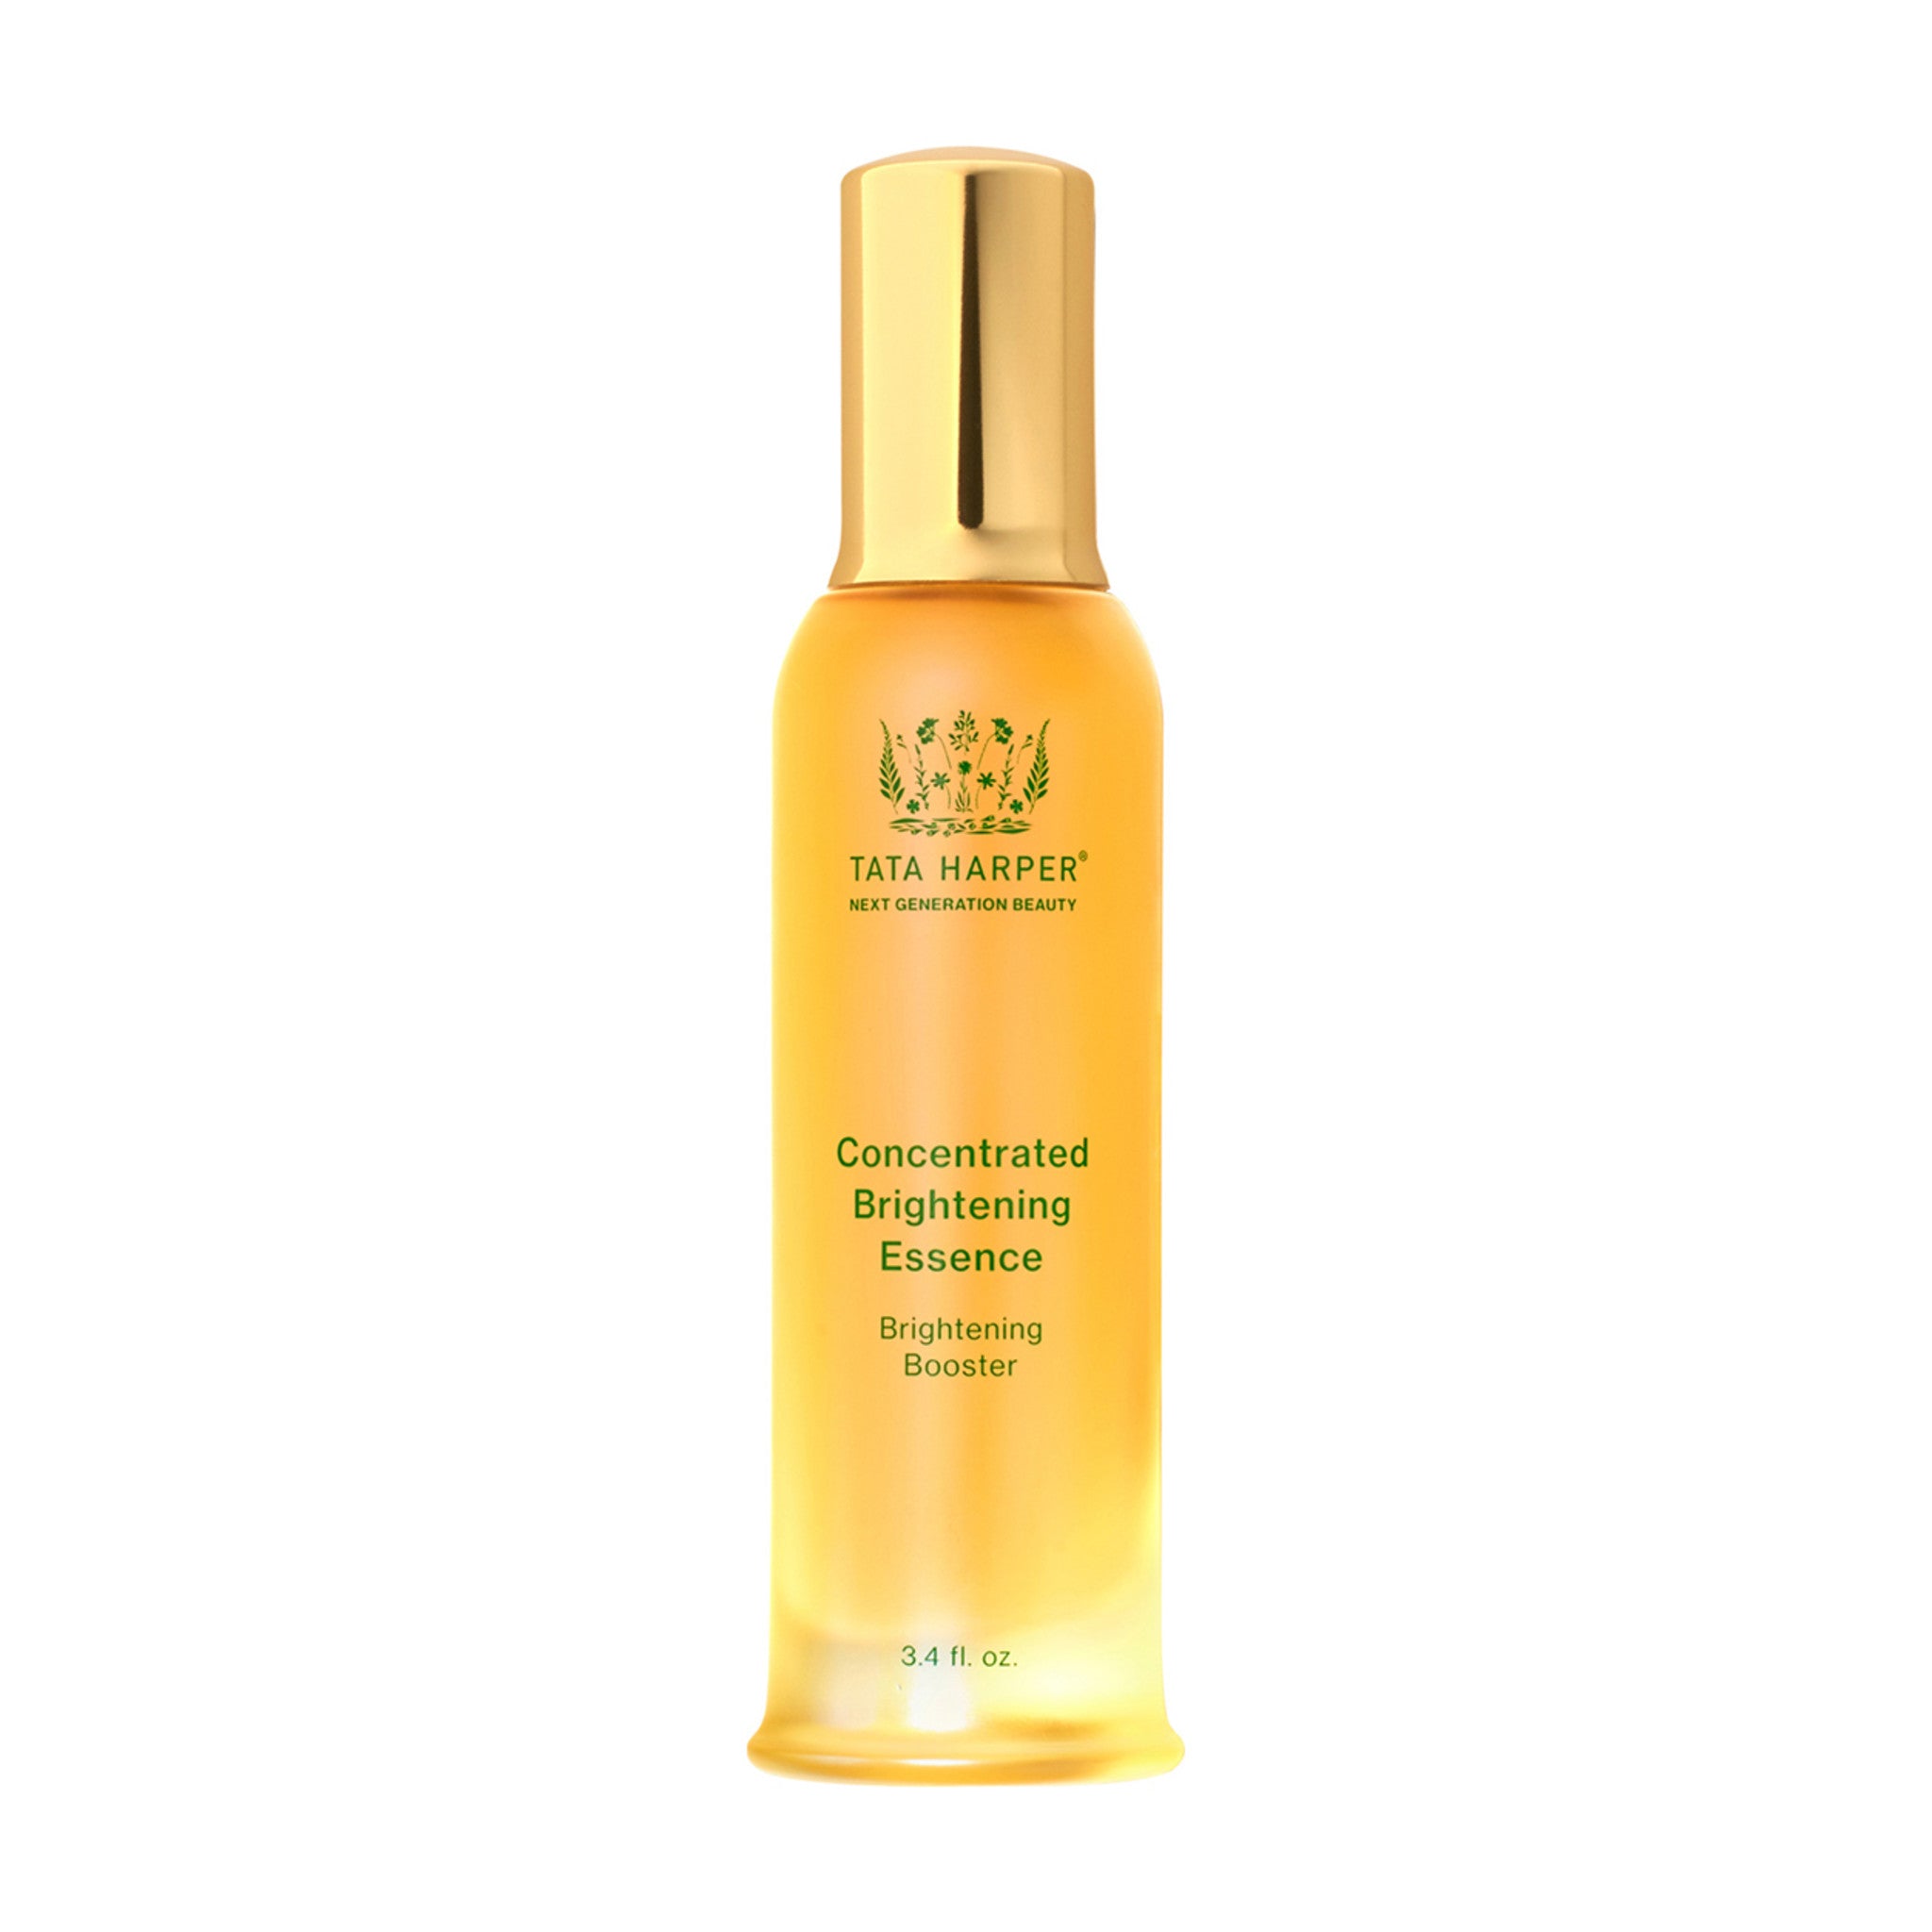 Tata Harper Concentrated Brightening Essence main image.